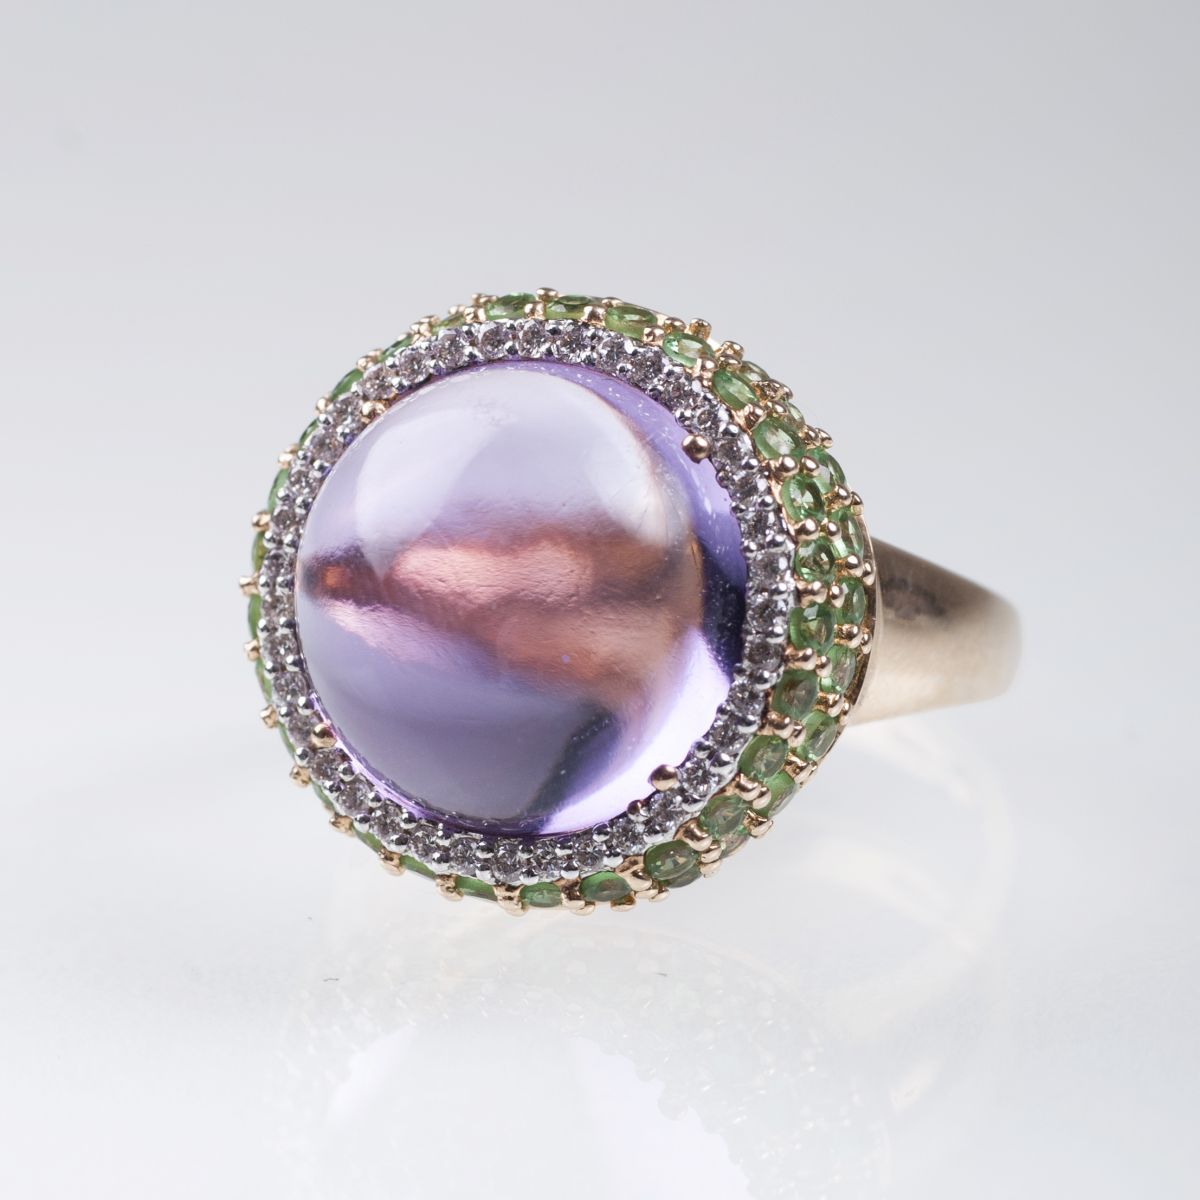 An amethyst tsavorith ring with small diamonds